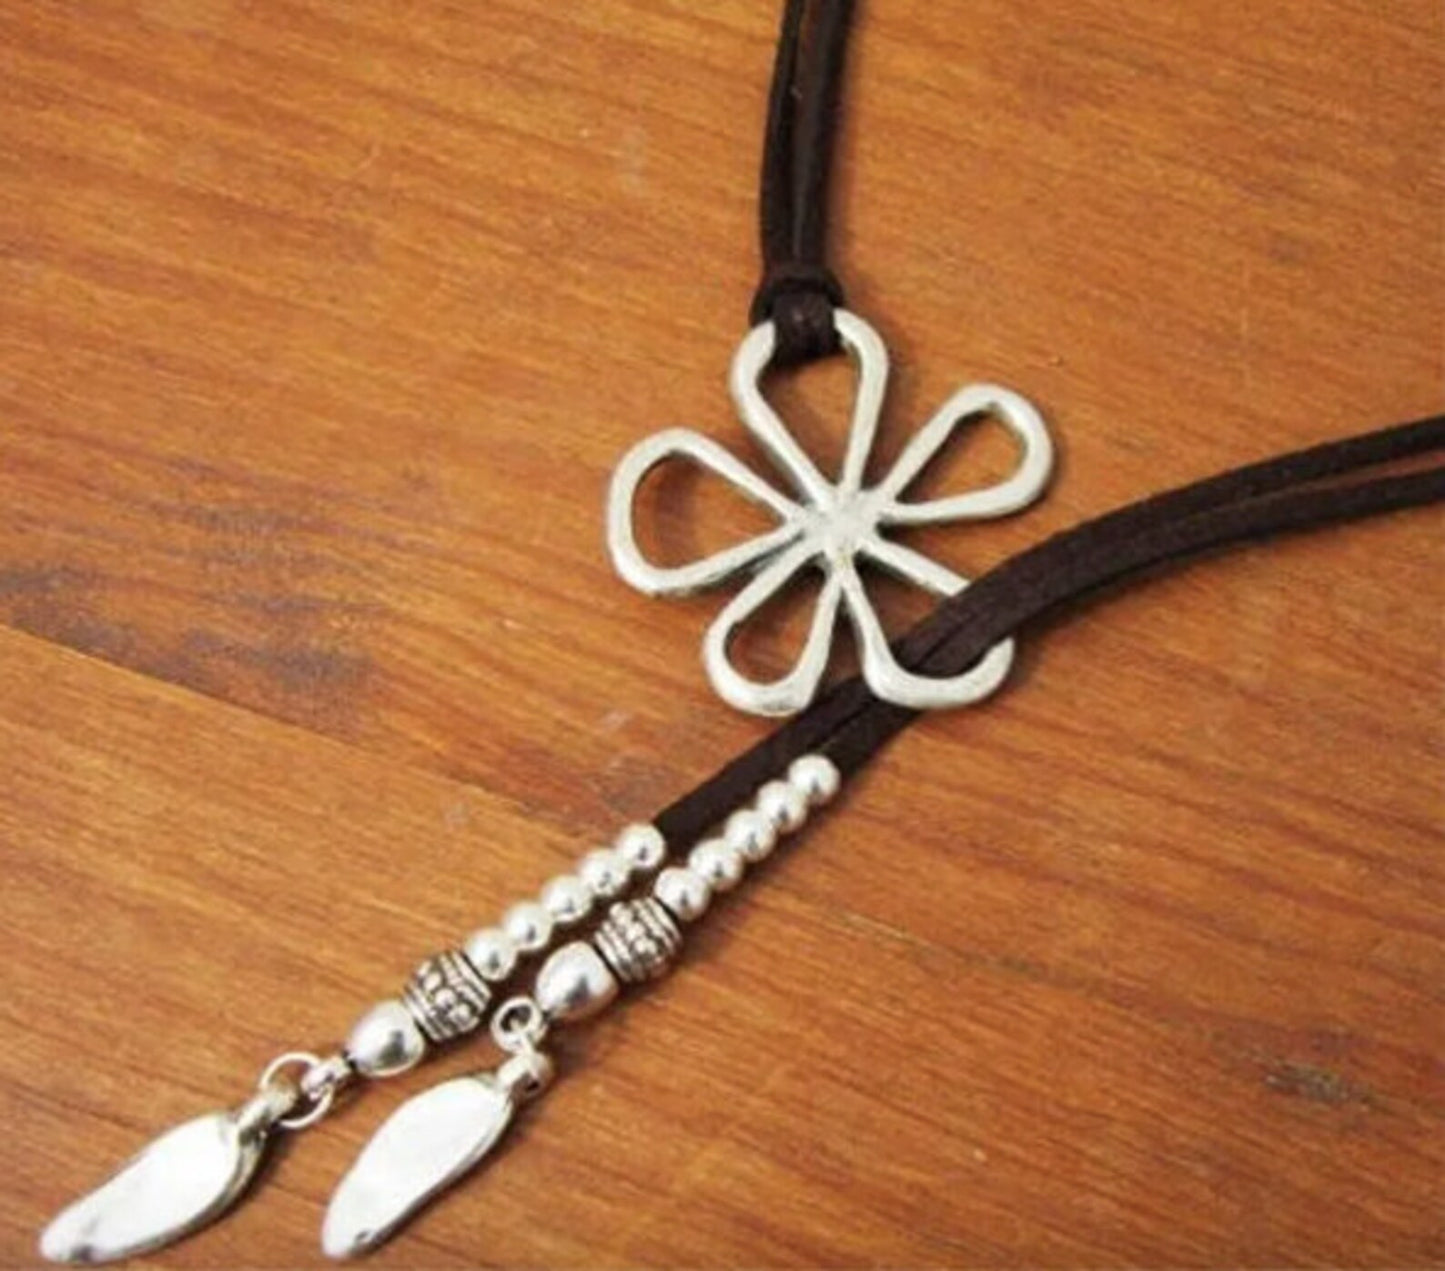 Flower Necklace with Black Suede Band